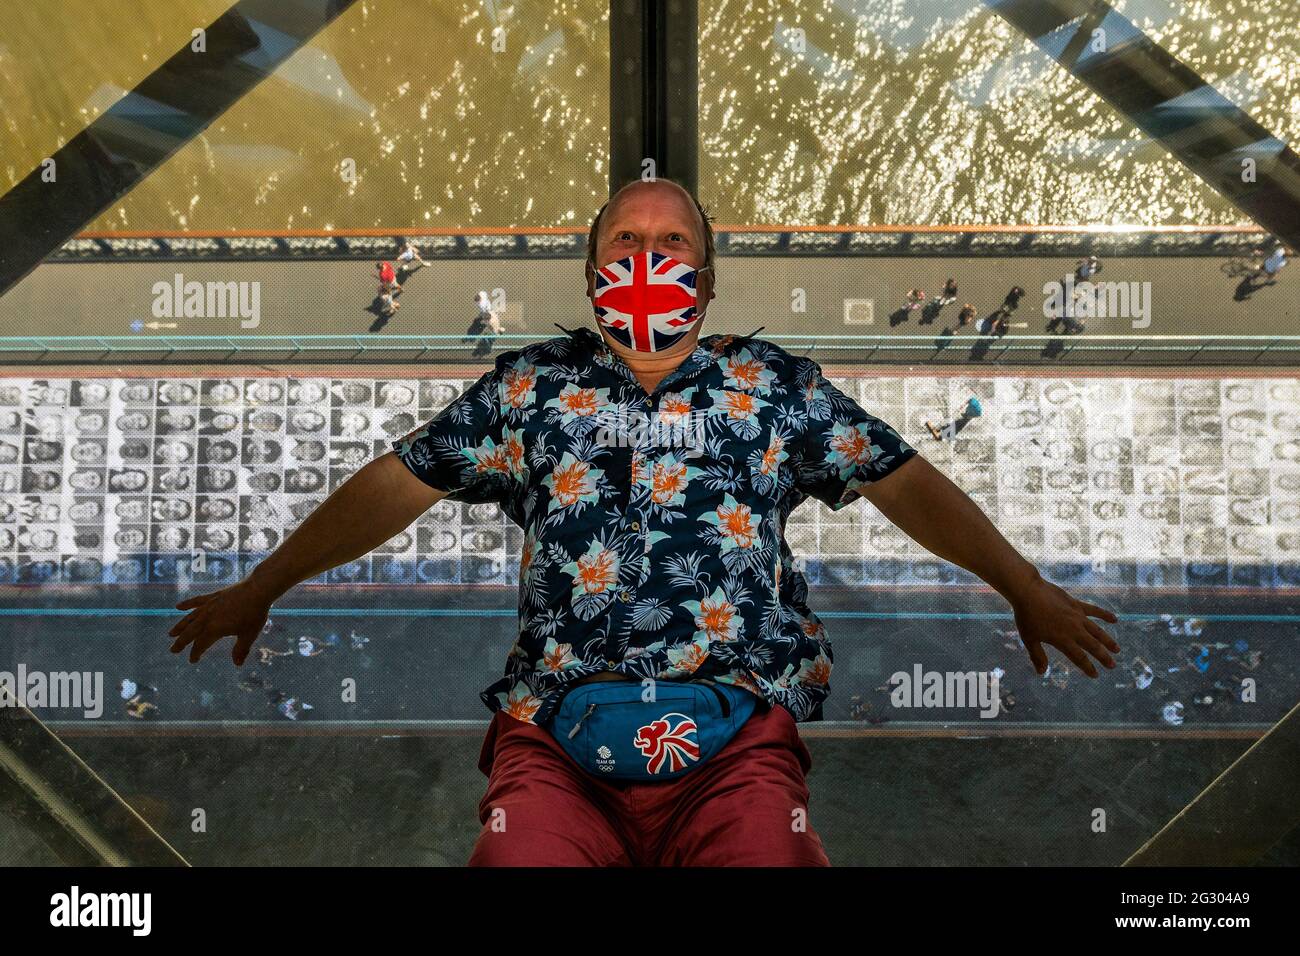 London, UK. 13 Jun 2021. Tourists lie on the floor of the viewing platform to look at themselves in the mirrored ceiling - Tower bridge as it is pasted with more than 3,000 black and white portrait photographs in celebration of the UEFA EURO 2020 Football Championships. Credit: Guy Bell/Alamy Live News Stock Photo